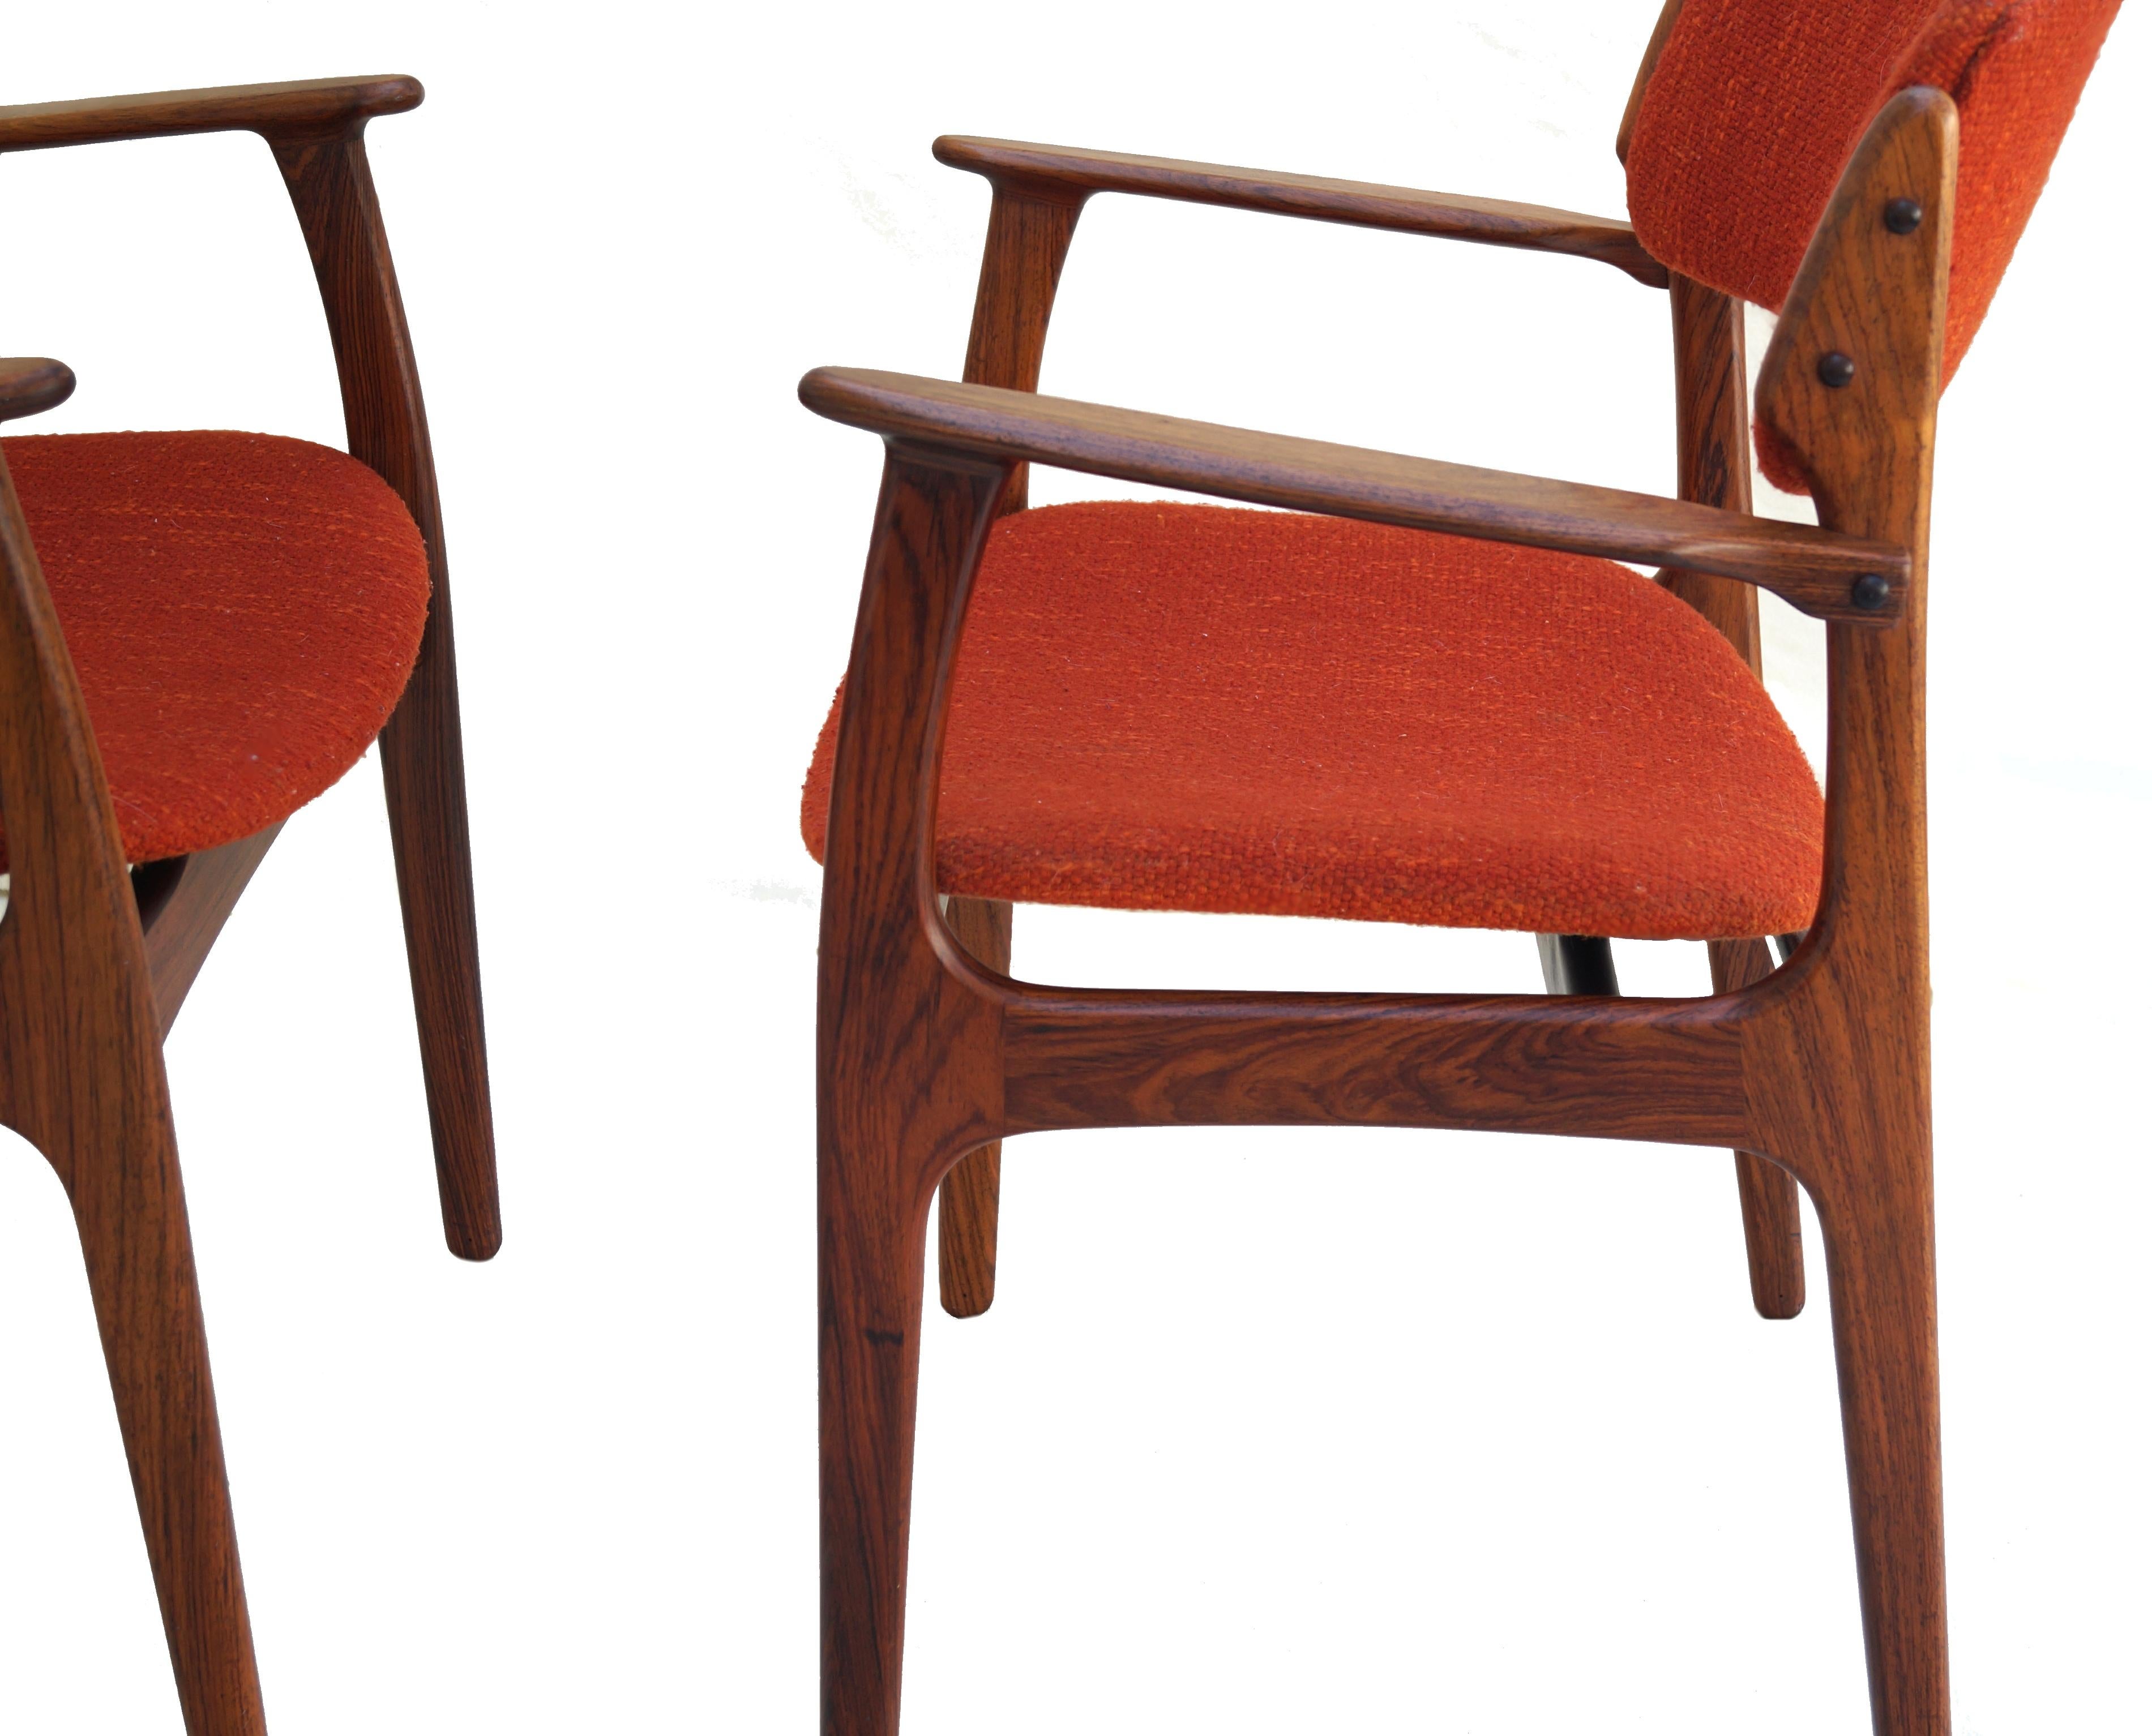 Pair Rosewood Mid-Century Danish Modern Arm Chair Chairs Erik Buch Model 50 In Good Condition For Sale In Wayne, NJ